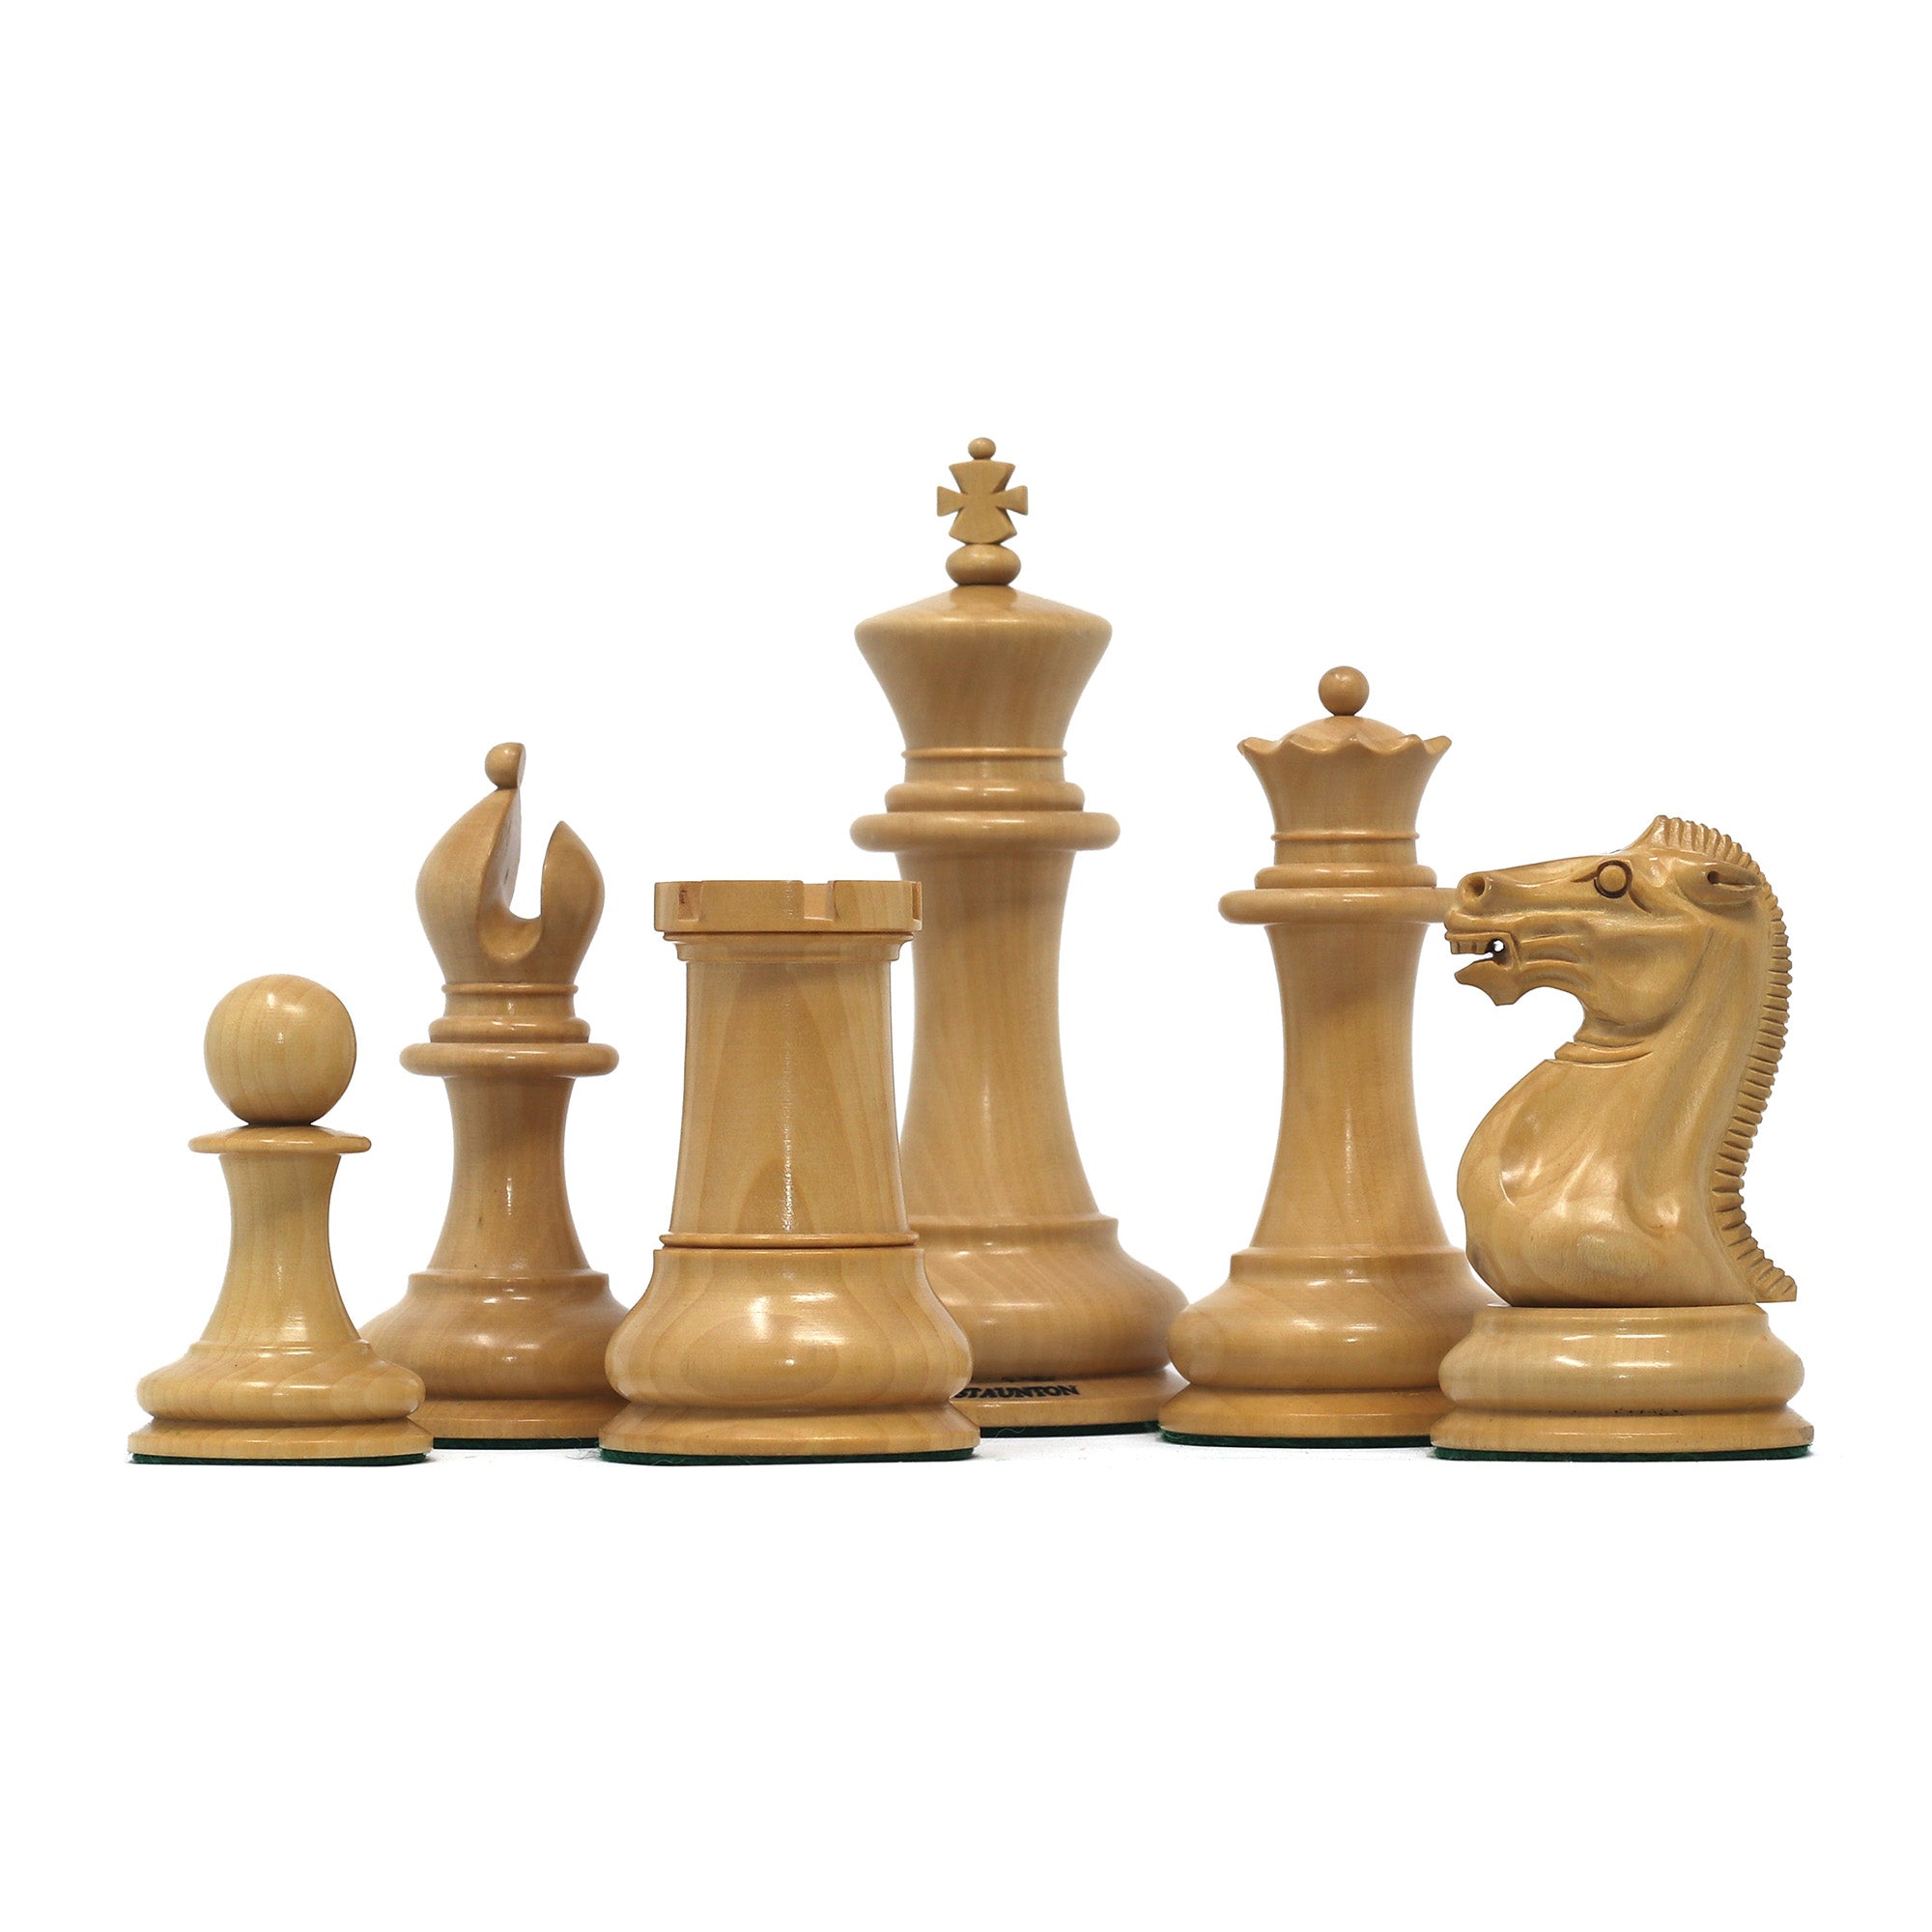 Original Reproduction Nathaniel 1849 Vintage 4.4" Chess Pieces in Boxwood & Ebony